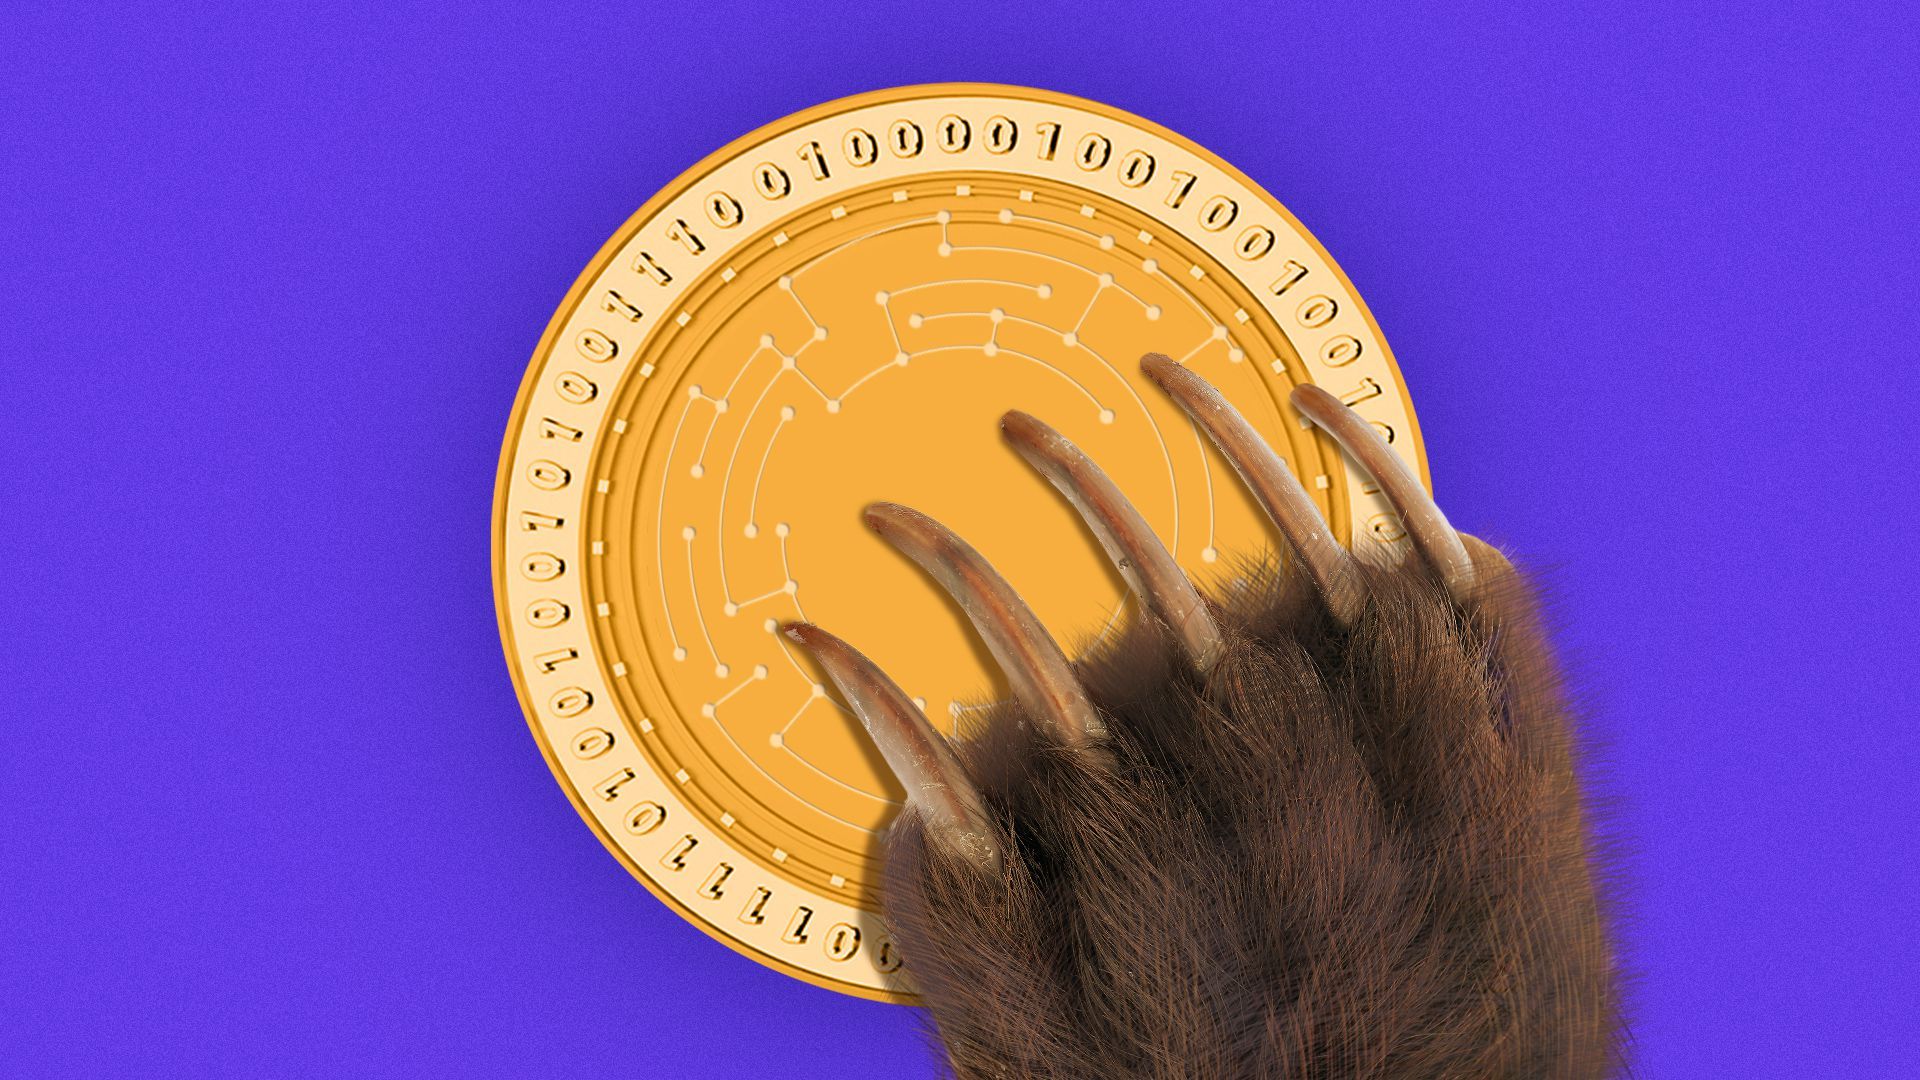 Illustration of a bear claw holding a crypto coin.